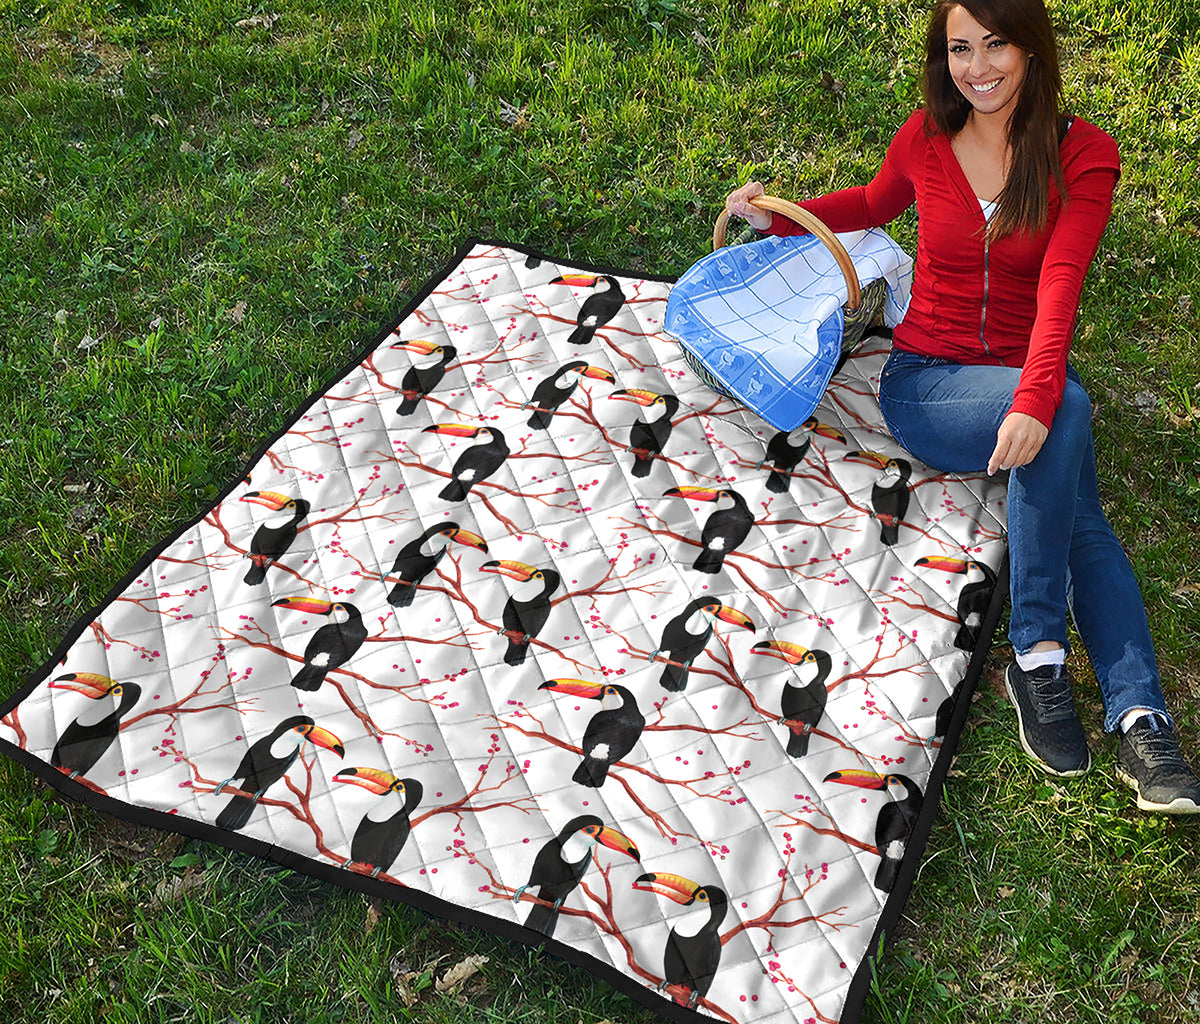 Toco Toucan Pattern Print Quilt